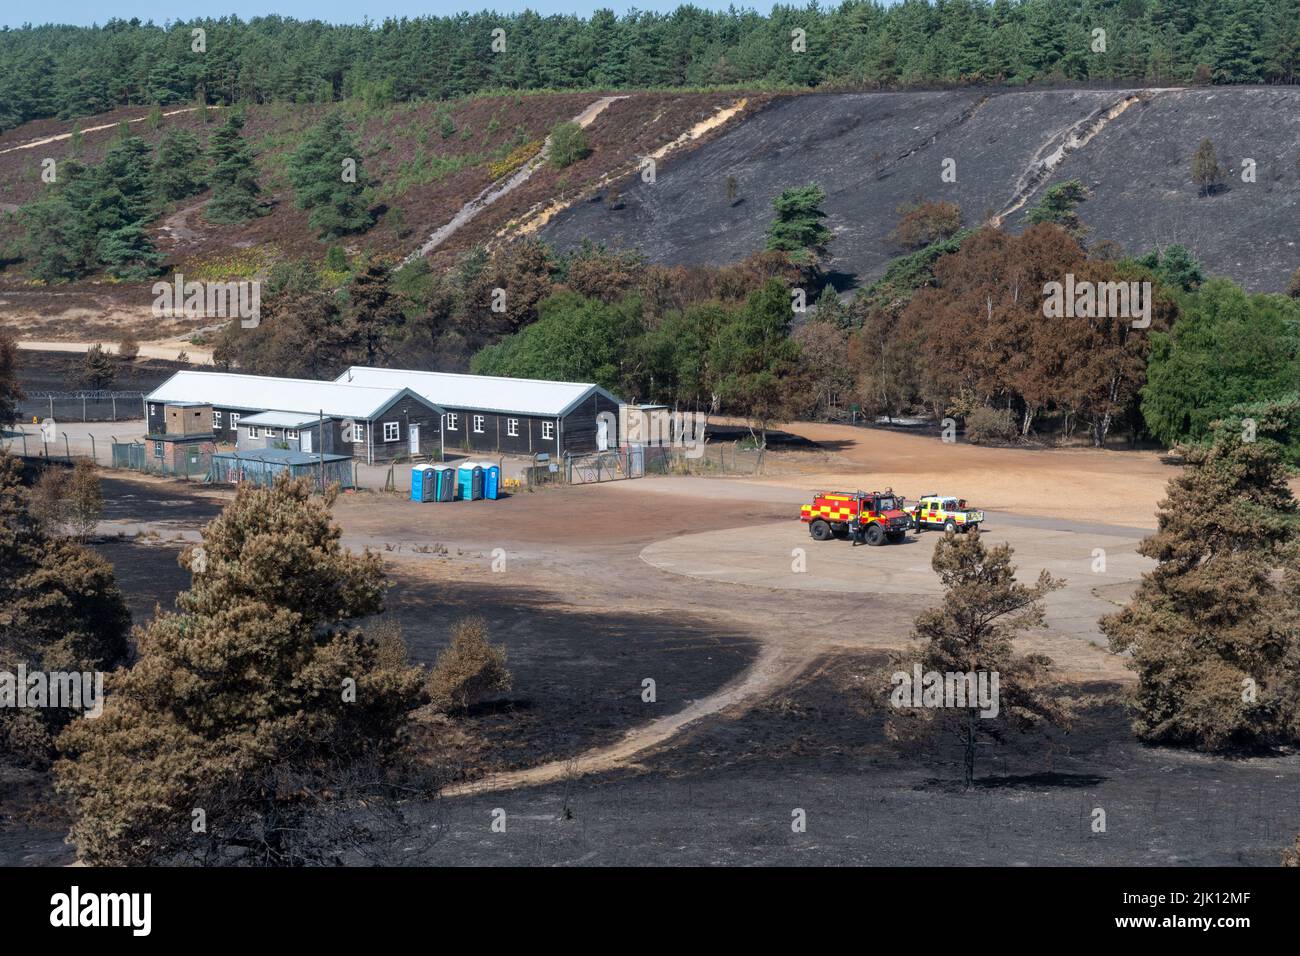 Hankley Common wildfire, Surrey, England, UK. Photographed 5 days after the huge fire that started on 24th July, 2022, and was declared a major incident by Surrey Fire & Rescue Service. This was the third of a series of fires at the common during the hot dry weather this July. An area of 50 or more hectares of heathland, a valuable wildlife habitat for ground-nesting birds and rare reptiles, has been destroyed. The fire service are still monitoring the site and damping down any hotspots. The cause of the fire remains unknown. Stock Photo